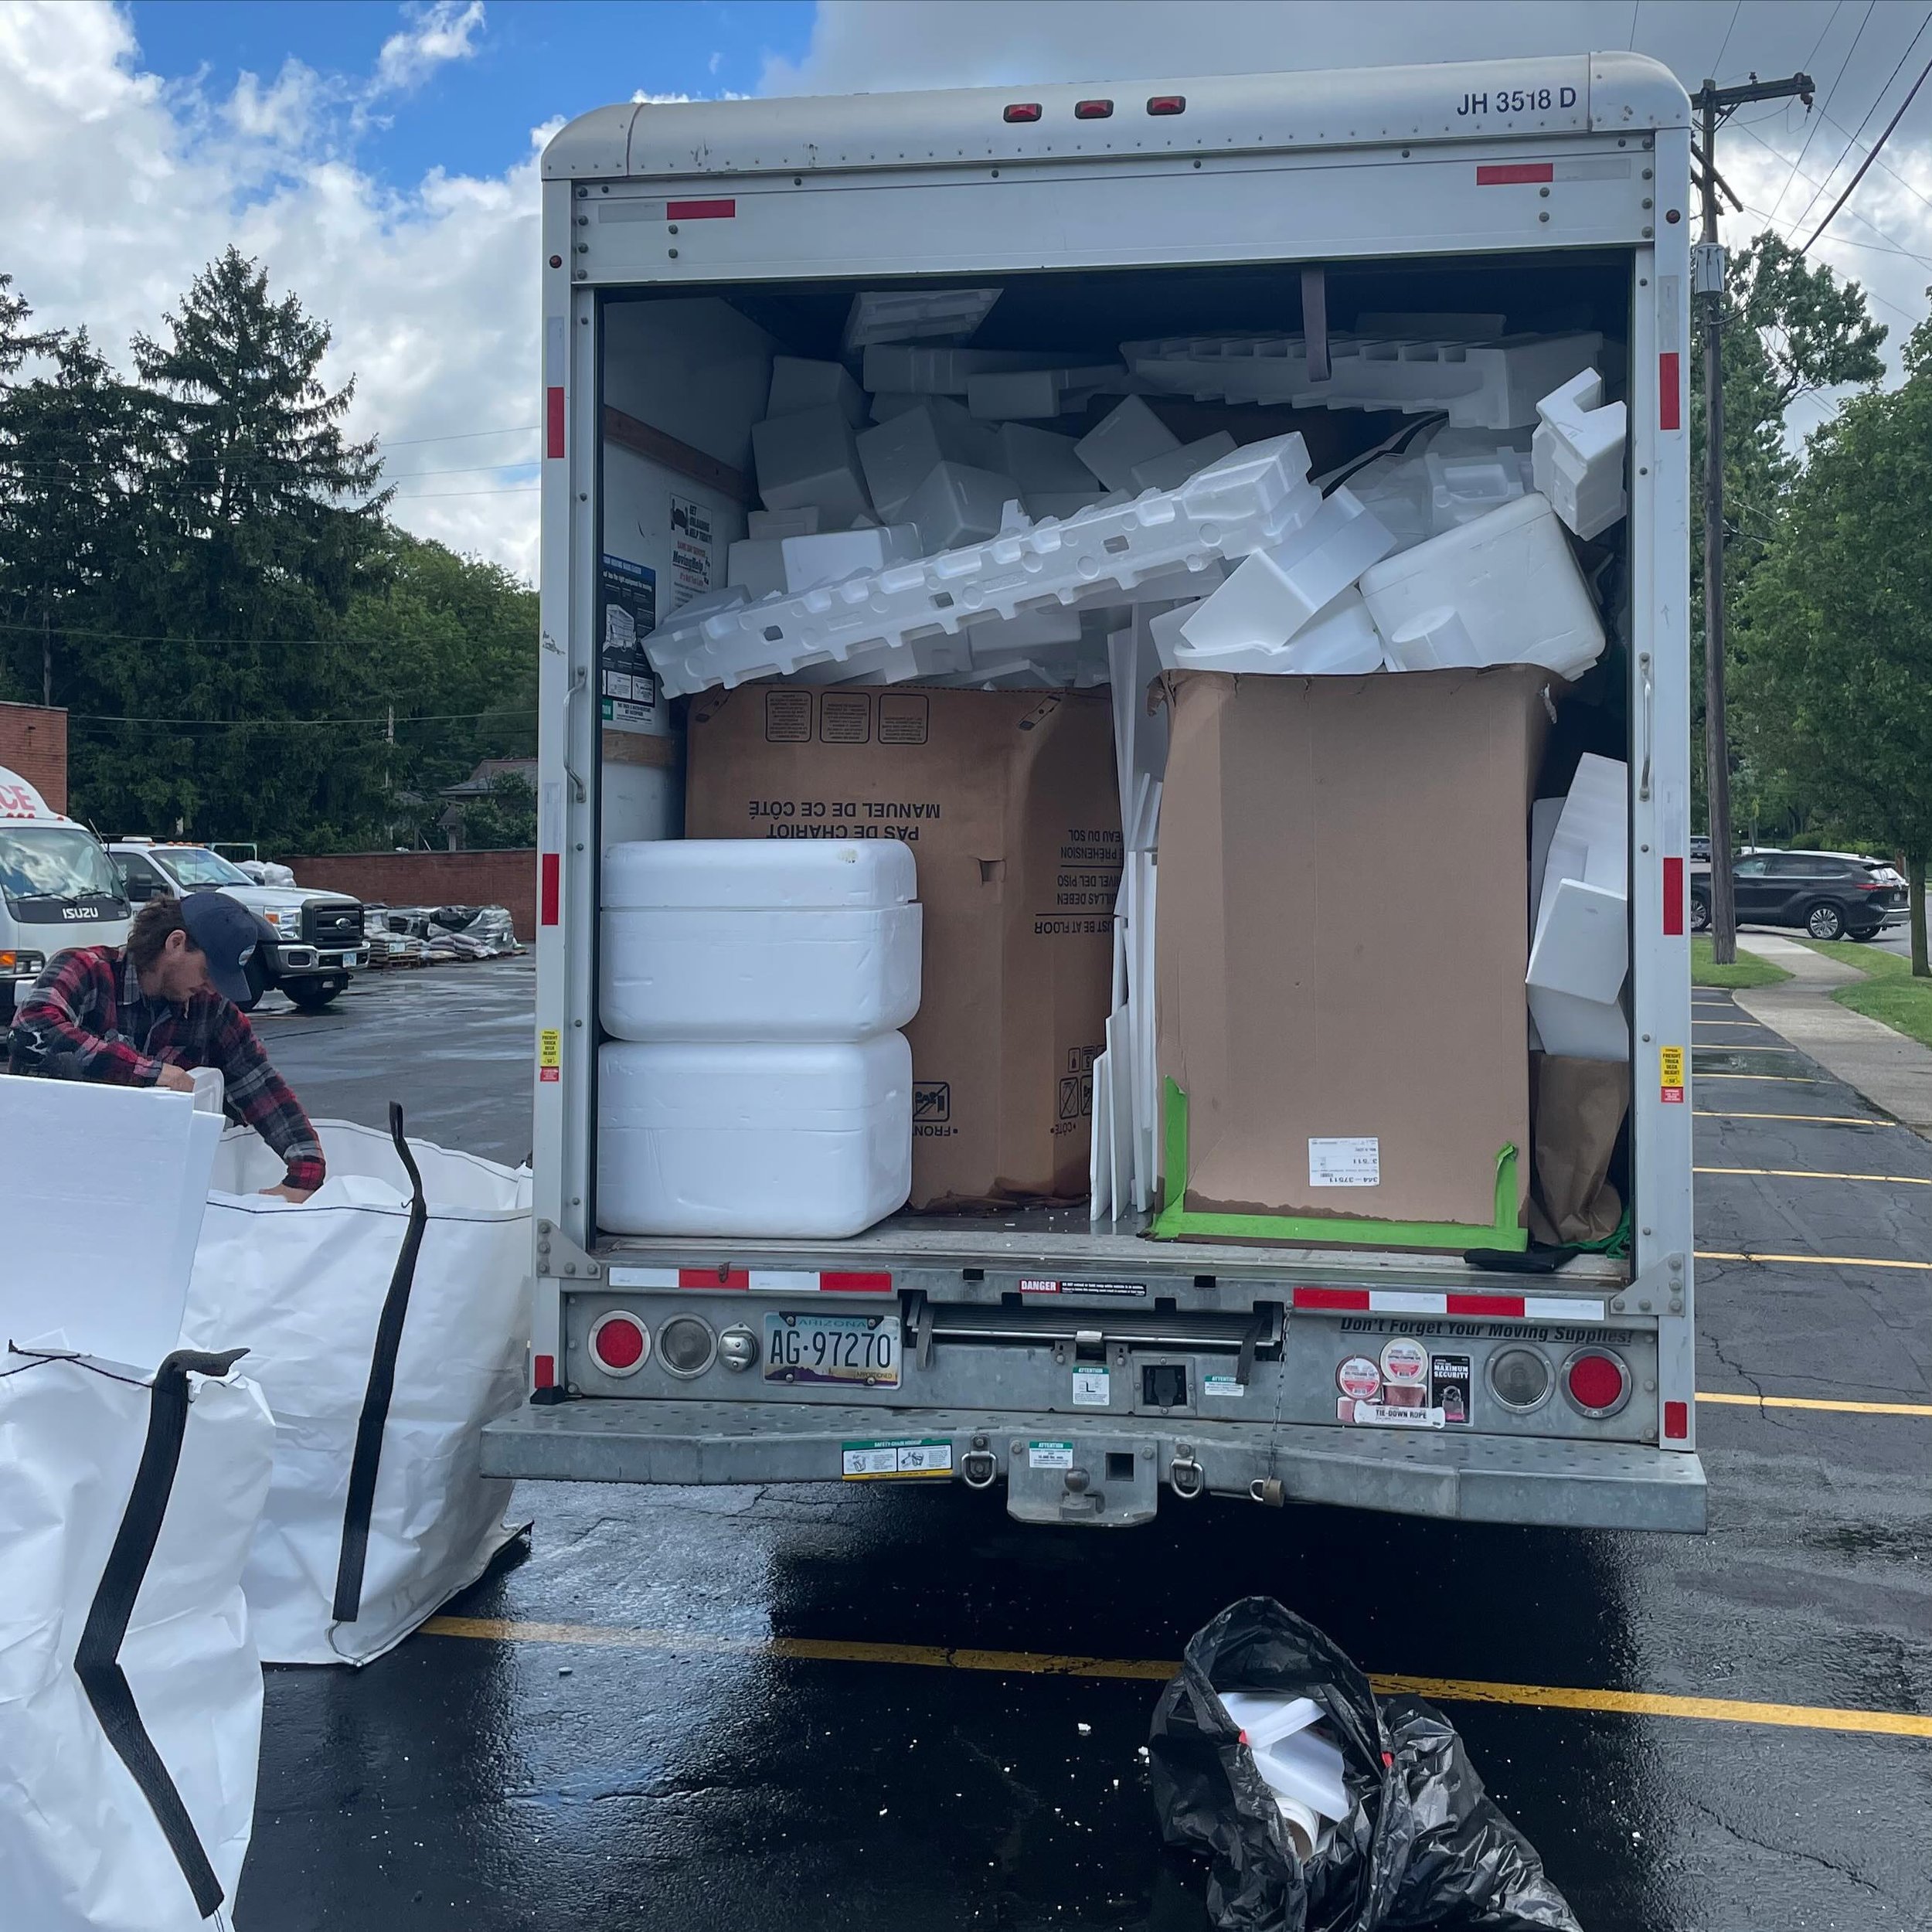 The styrofoam collection truck is full and heading to the @hilliardgov densifier